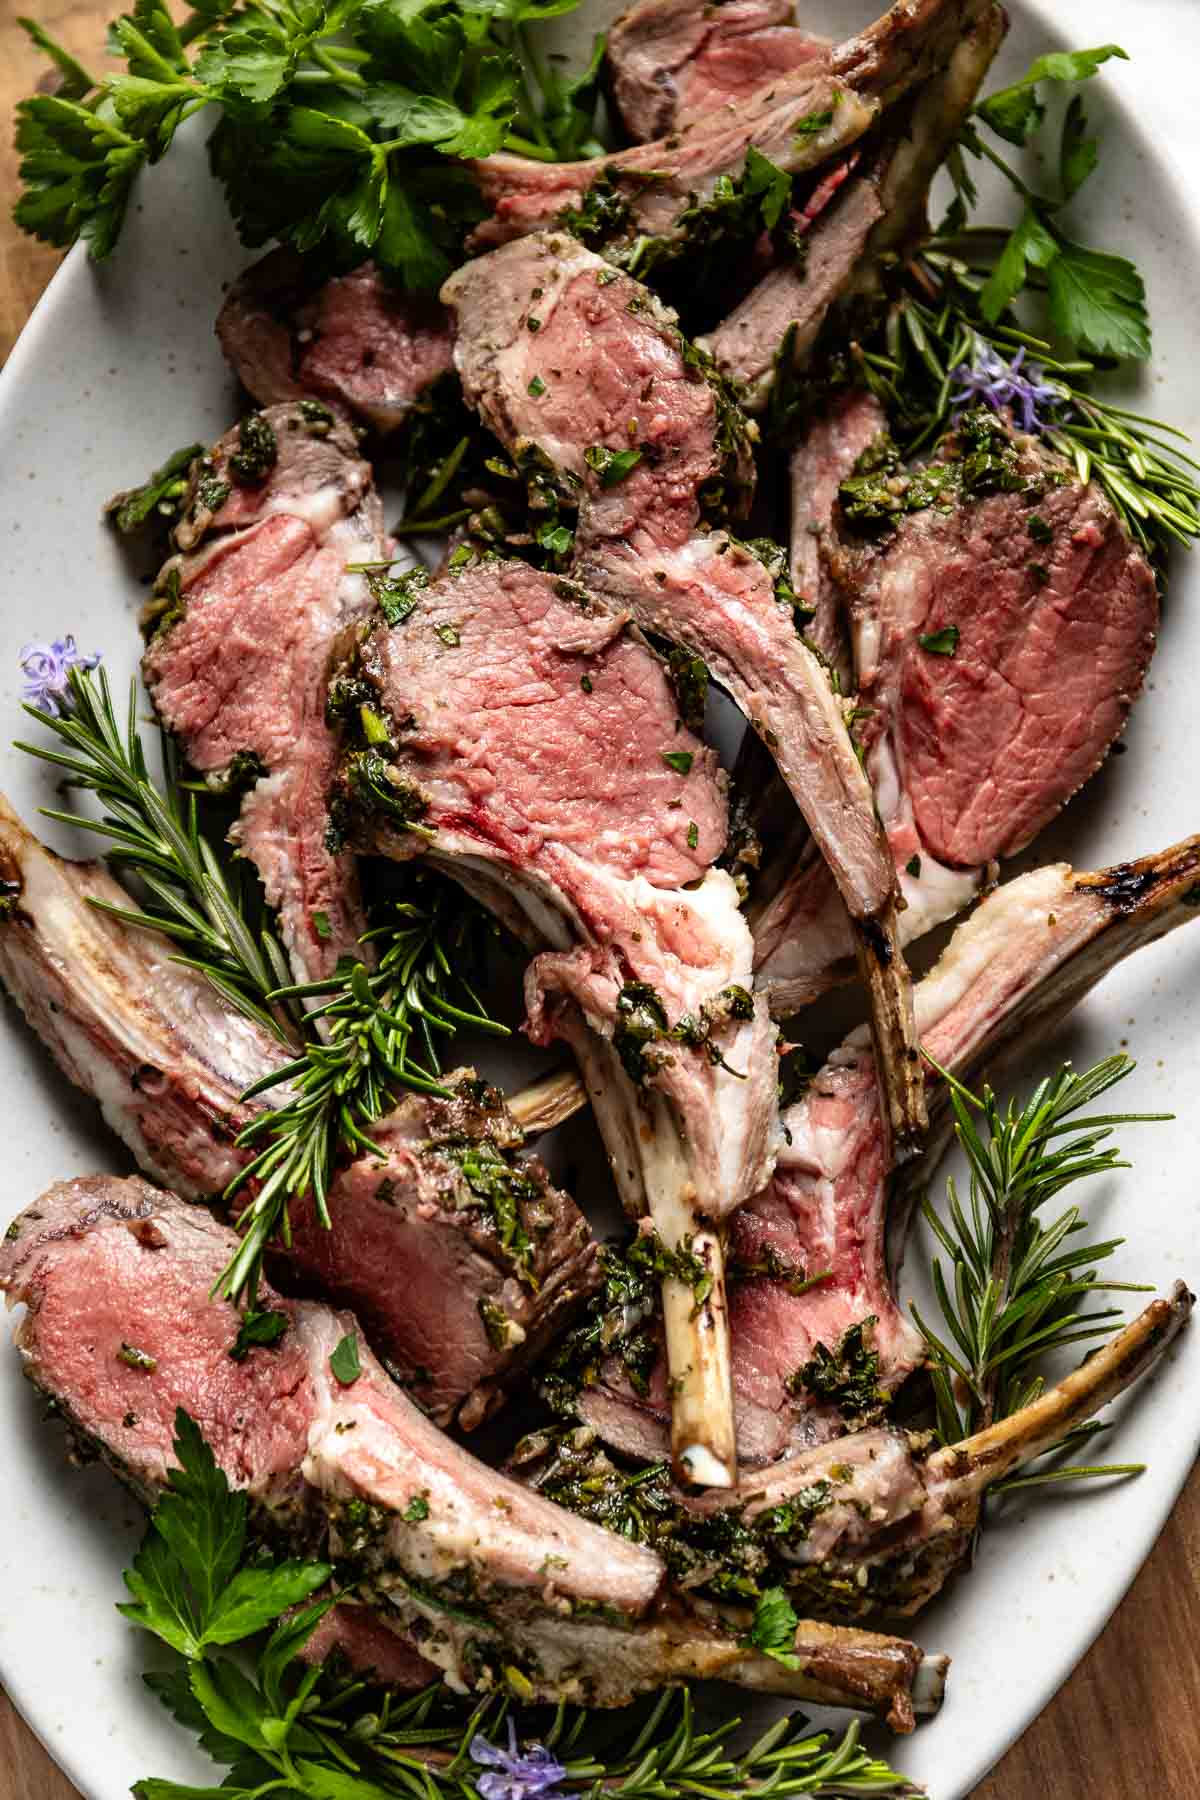 Roasted rack of lamb garnished with rosemary.